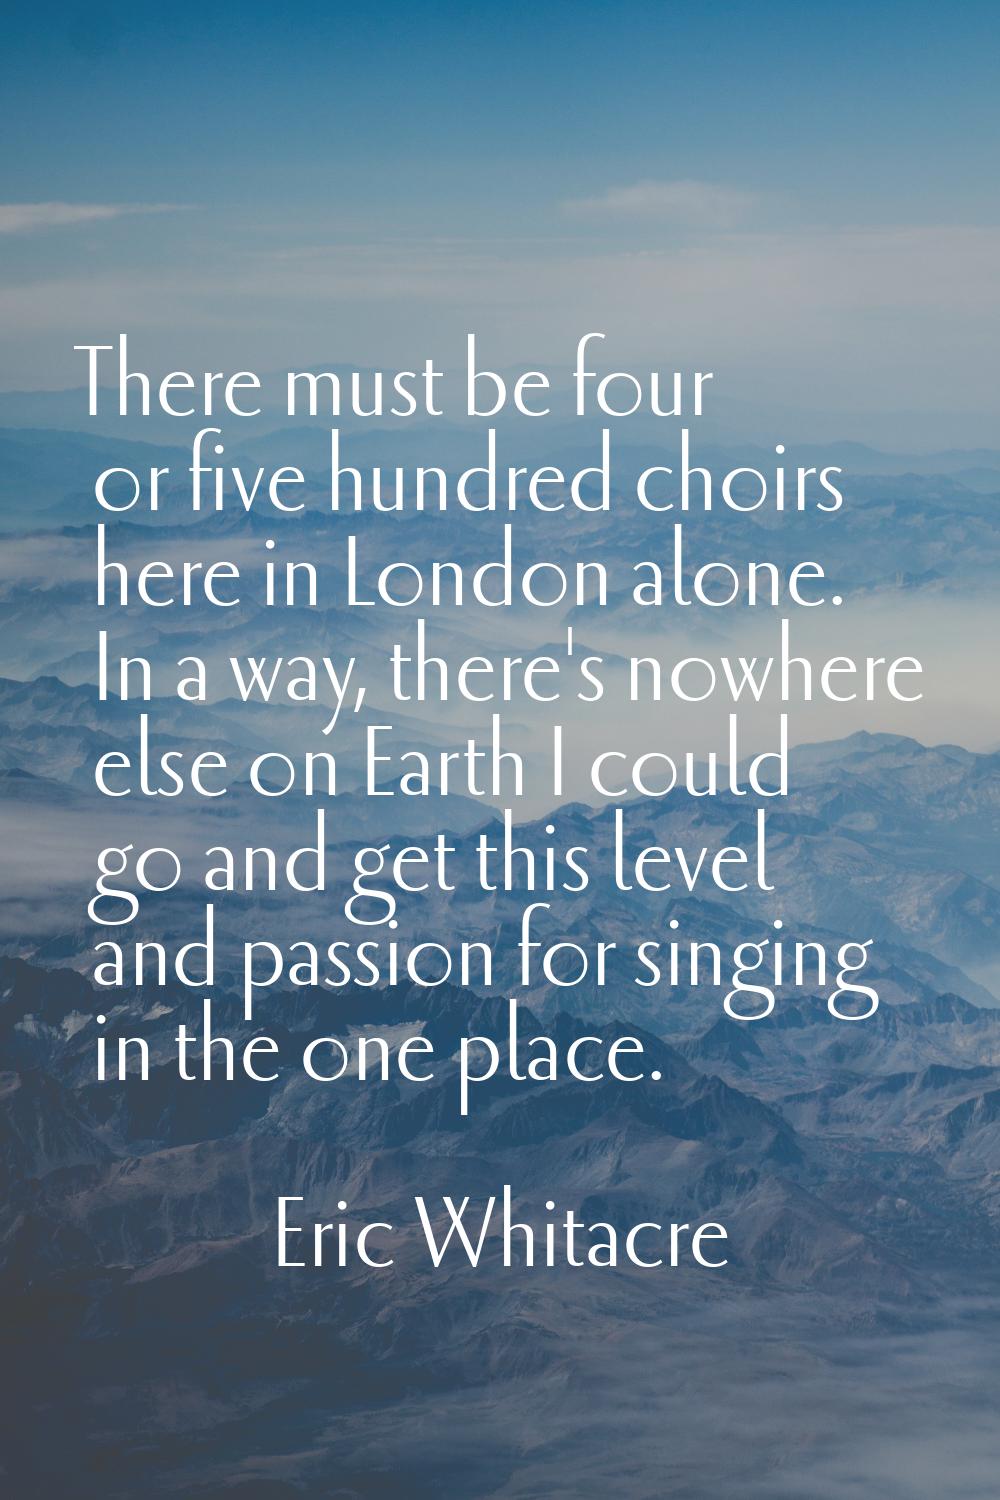 There must be four or five hundred choirs here in London alone. In a way, there's nowhere else on E